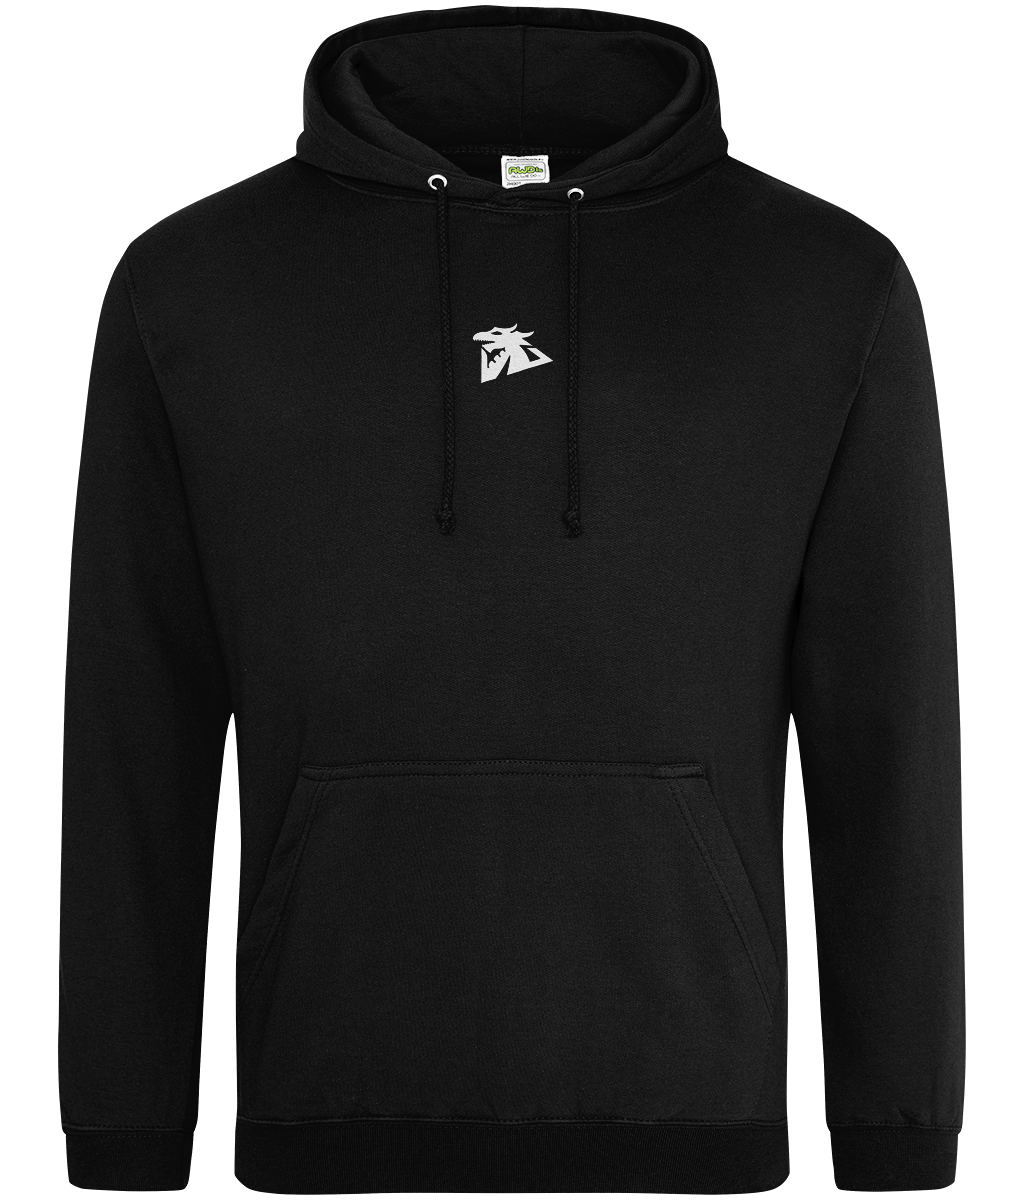 LIFT STRONGER EVERYDAY ESSENTIAL HOODIE